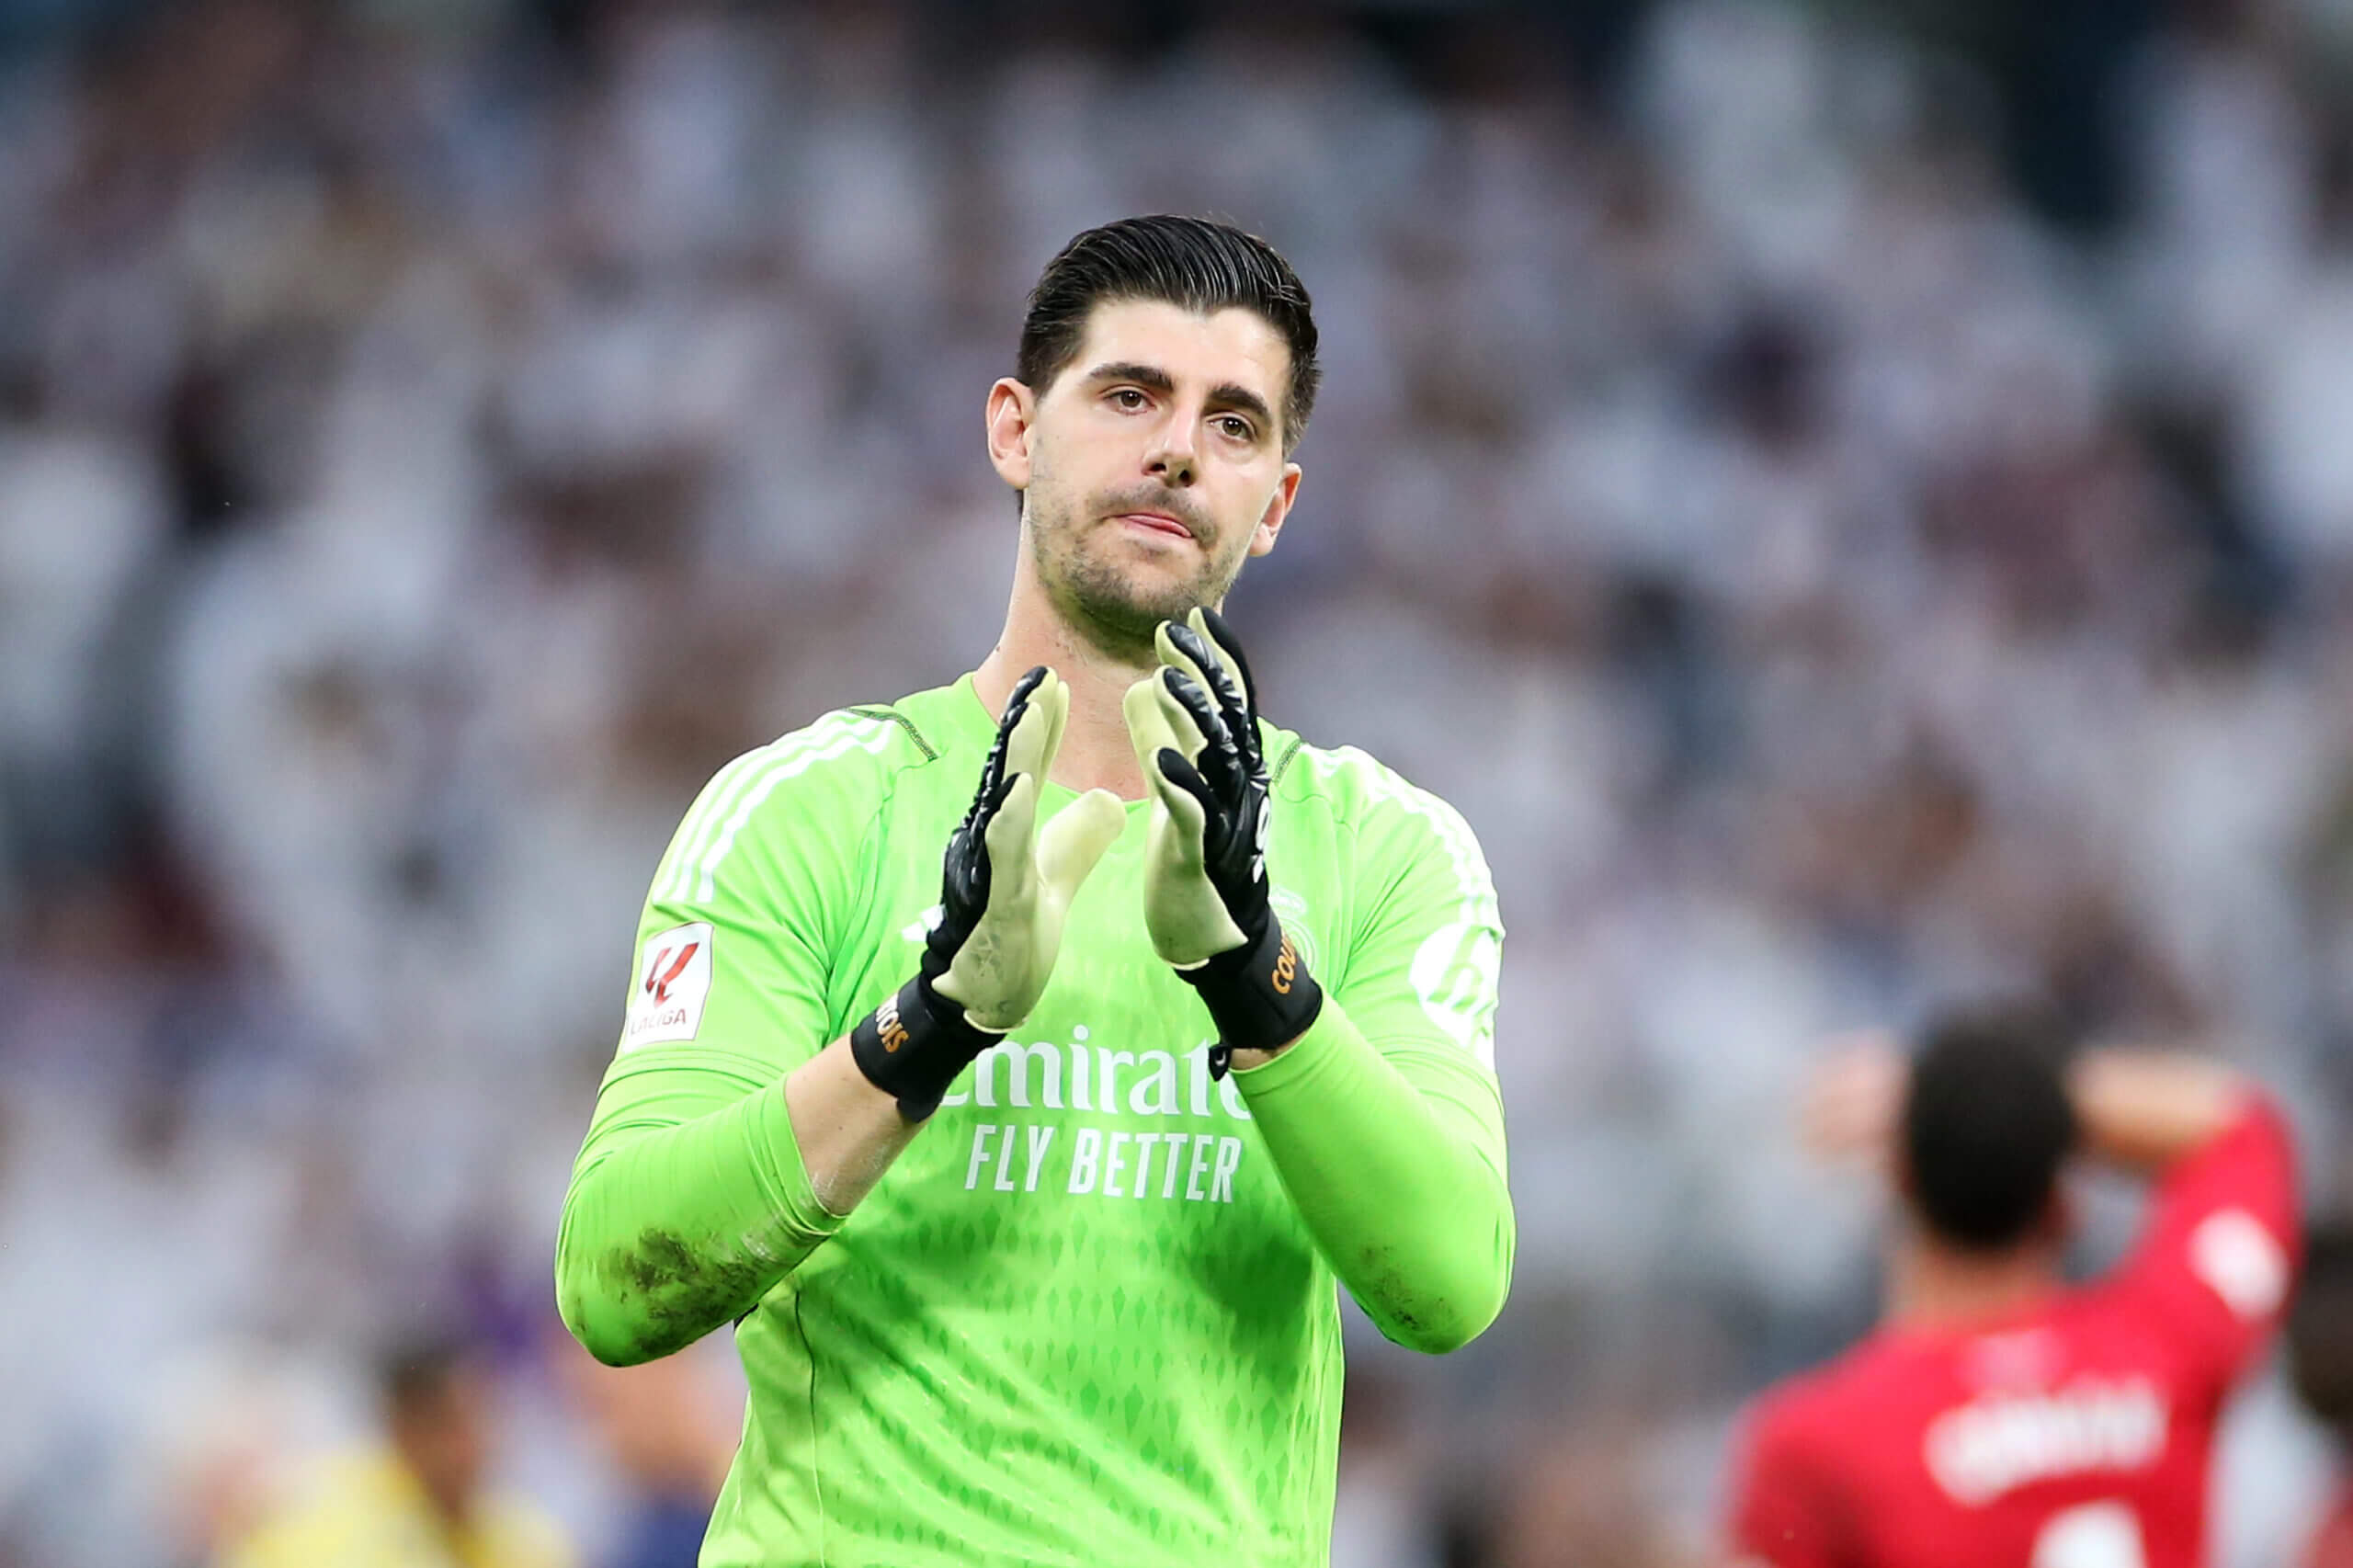 Prime to produce documentary about Courtois' injury recovery